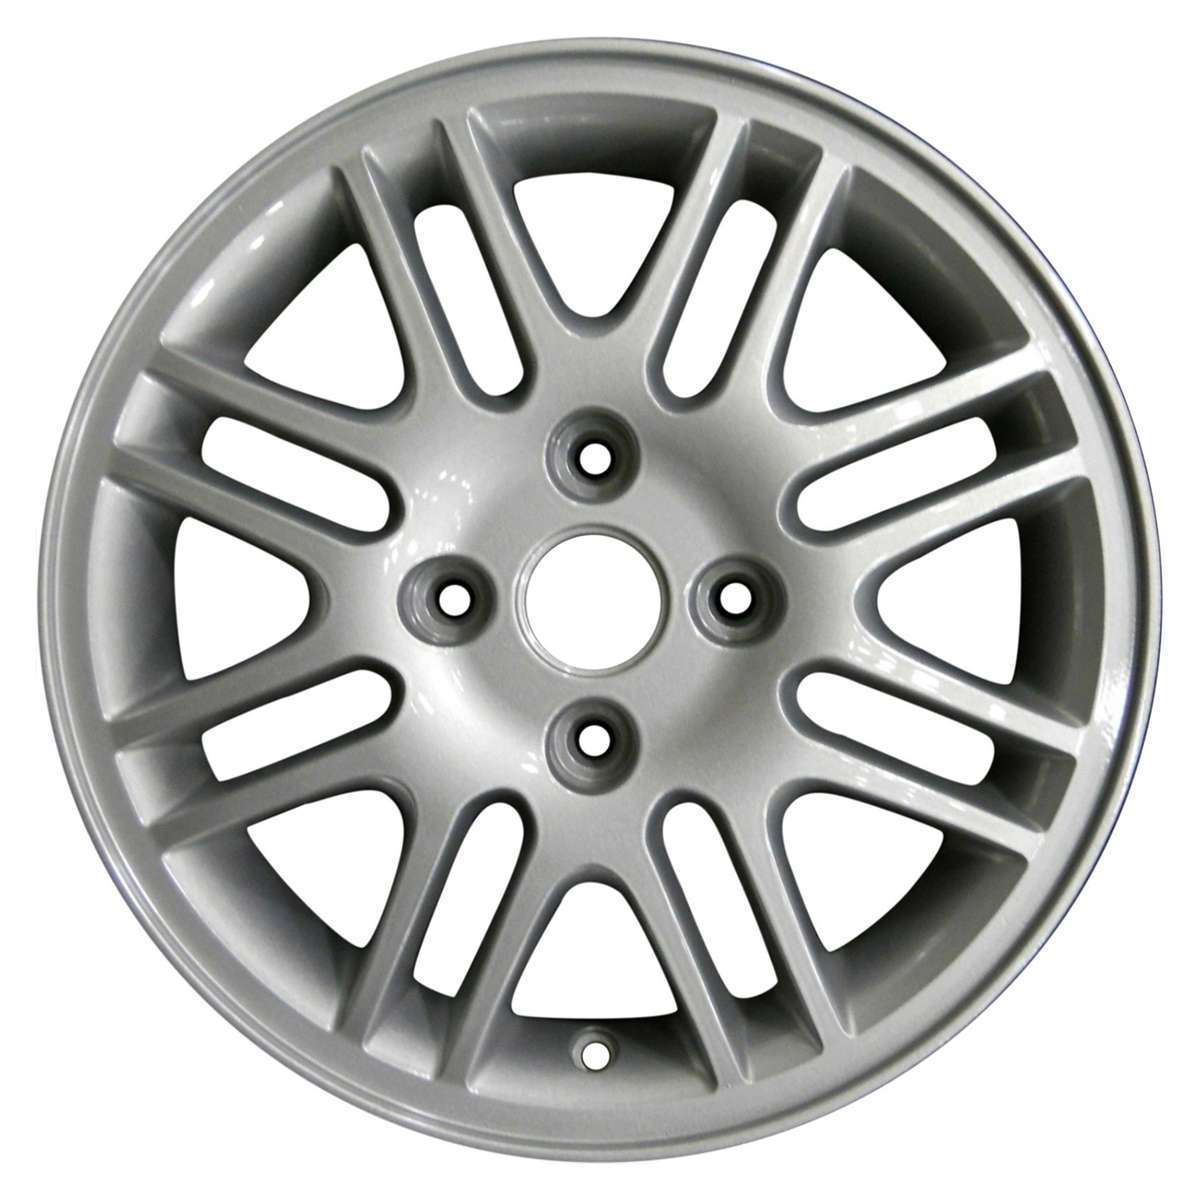 2008 Ford Focus New 15" Replacement Wheel Rim RW3367S